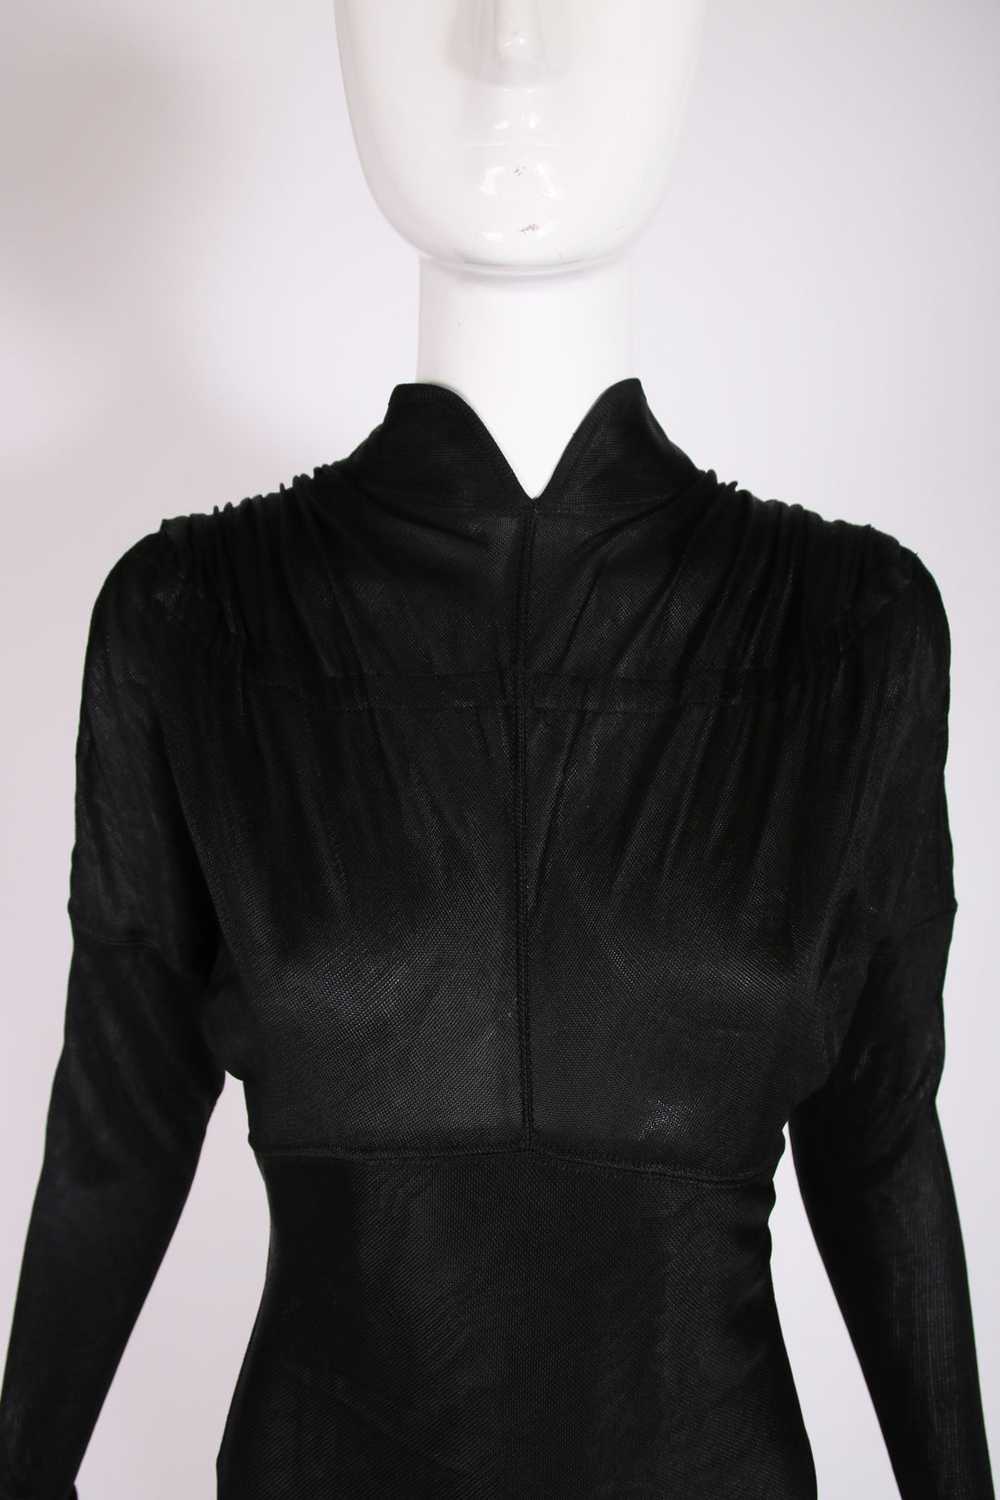 1986 Azzedine Alaia Black Trained Gown - image 3